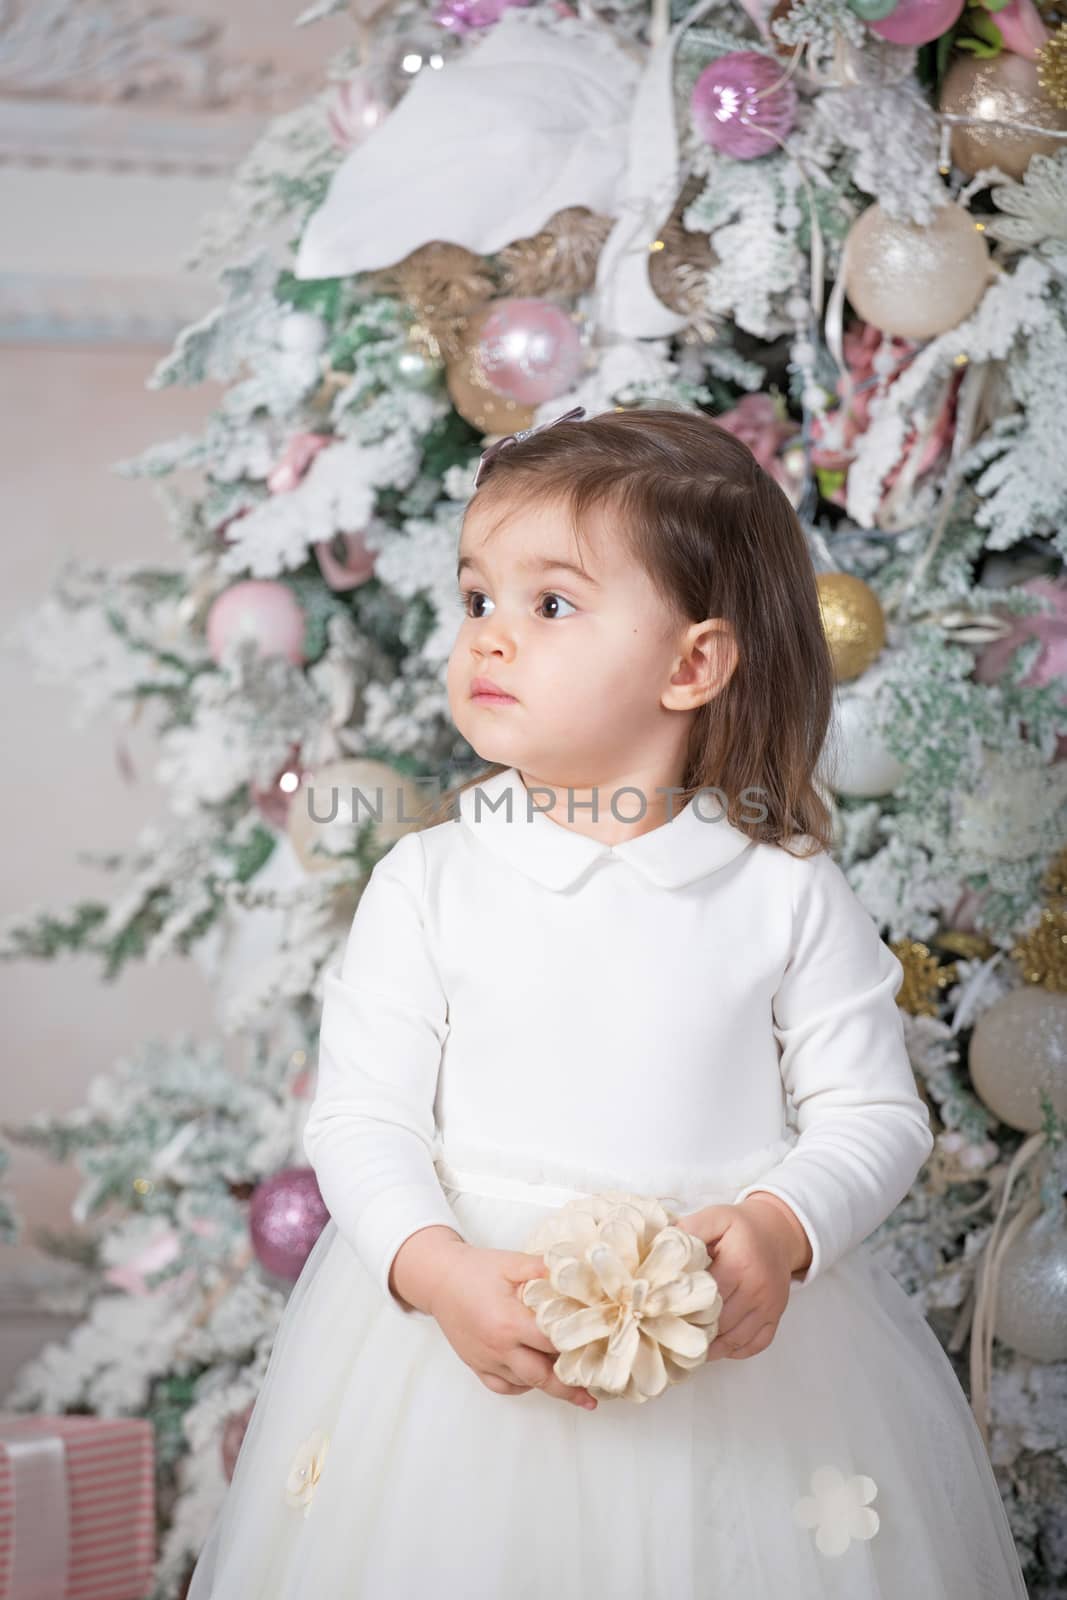 Merry Christmas and Happy Holidays ! Cute funny little child girl near decorated Christmas tree indoors